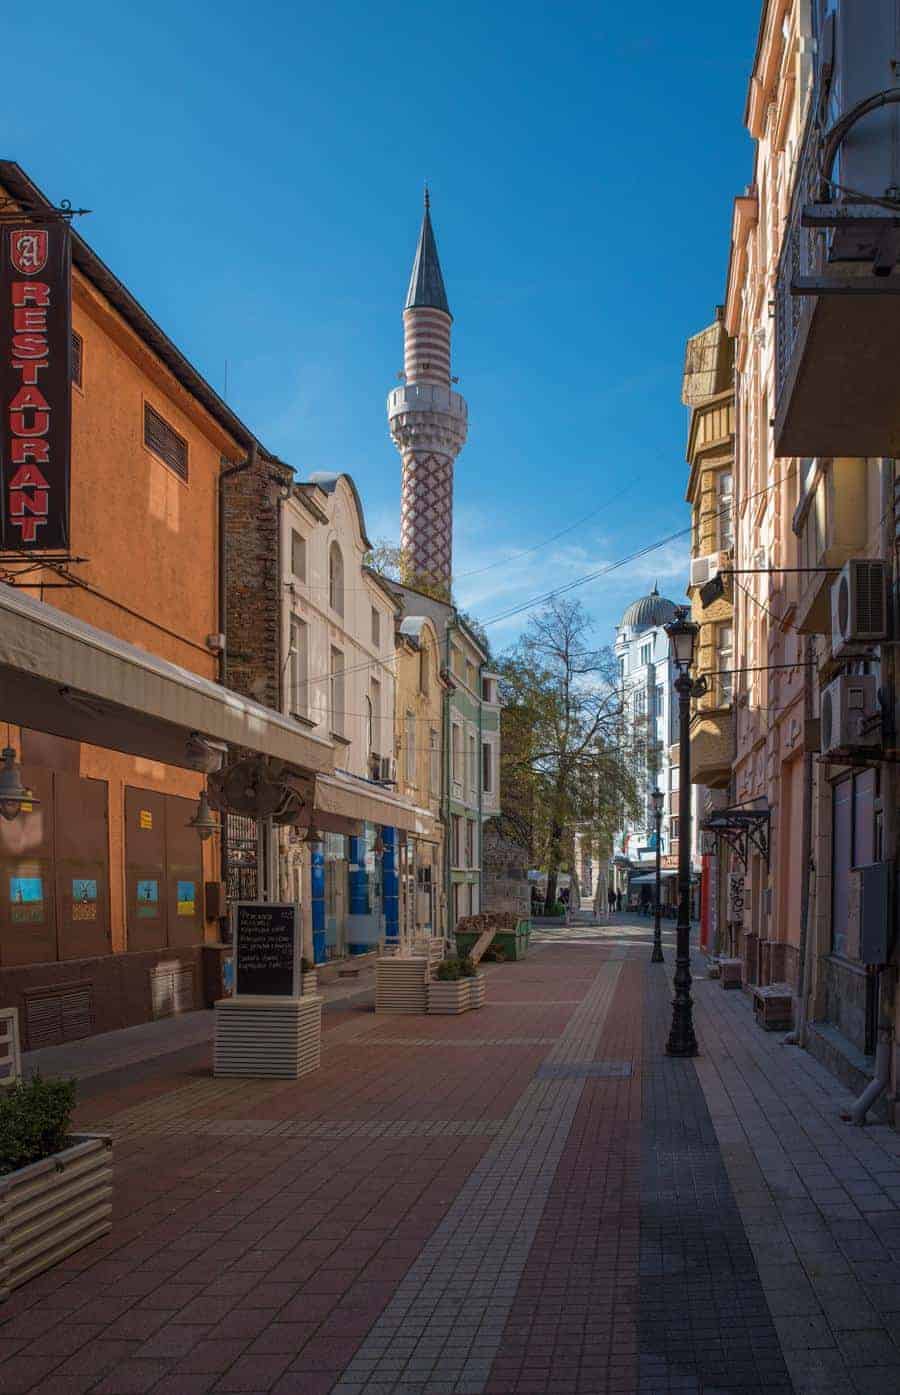 A pedestrian only street lined with shops and a mosque minaret at the end. 